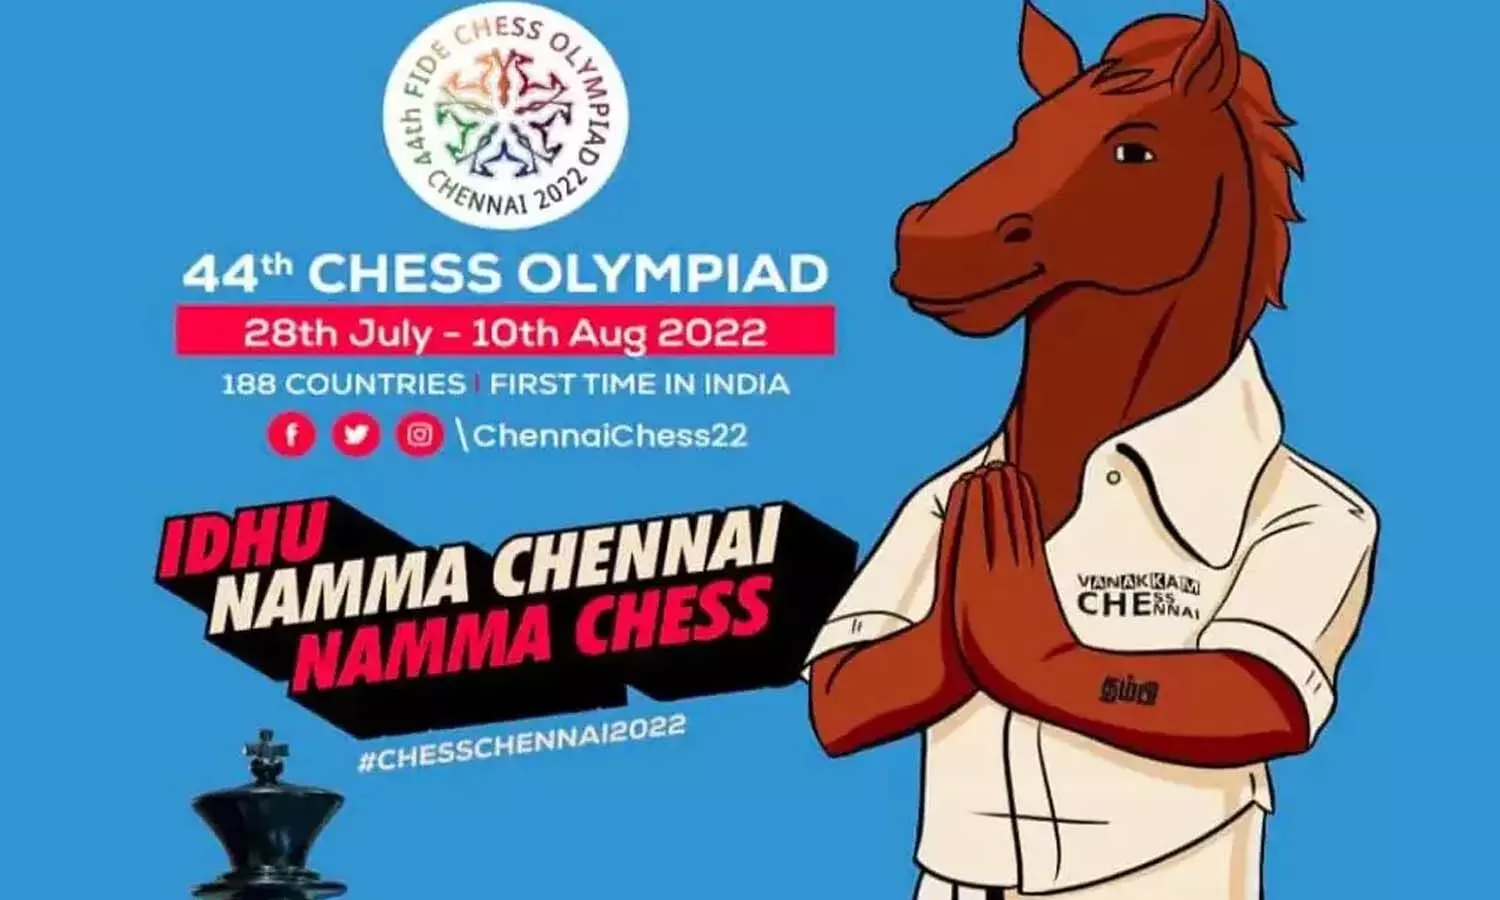 44th Chess Olympiad Makes Tamil Nadu Chess Capital Of India